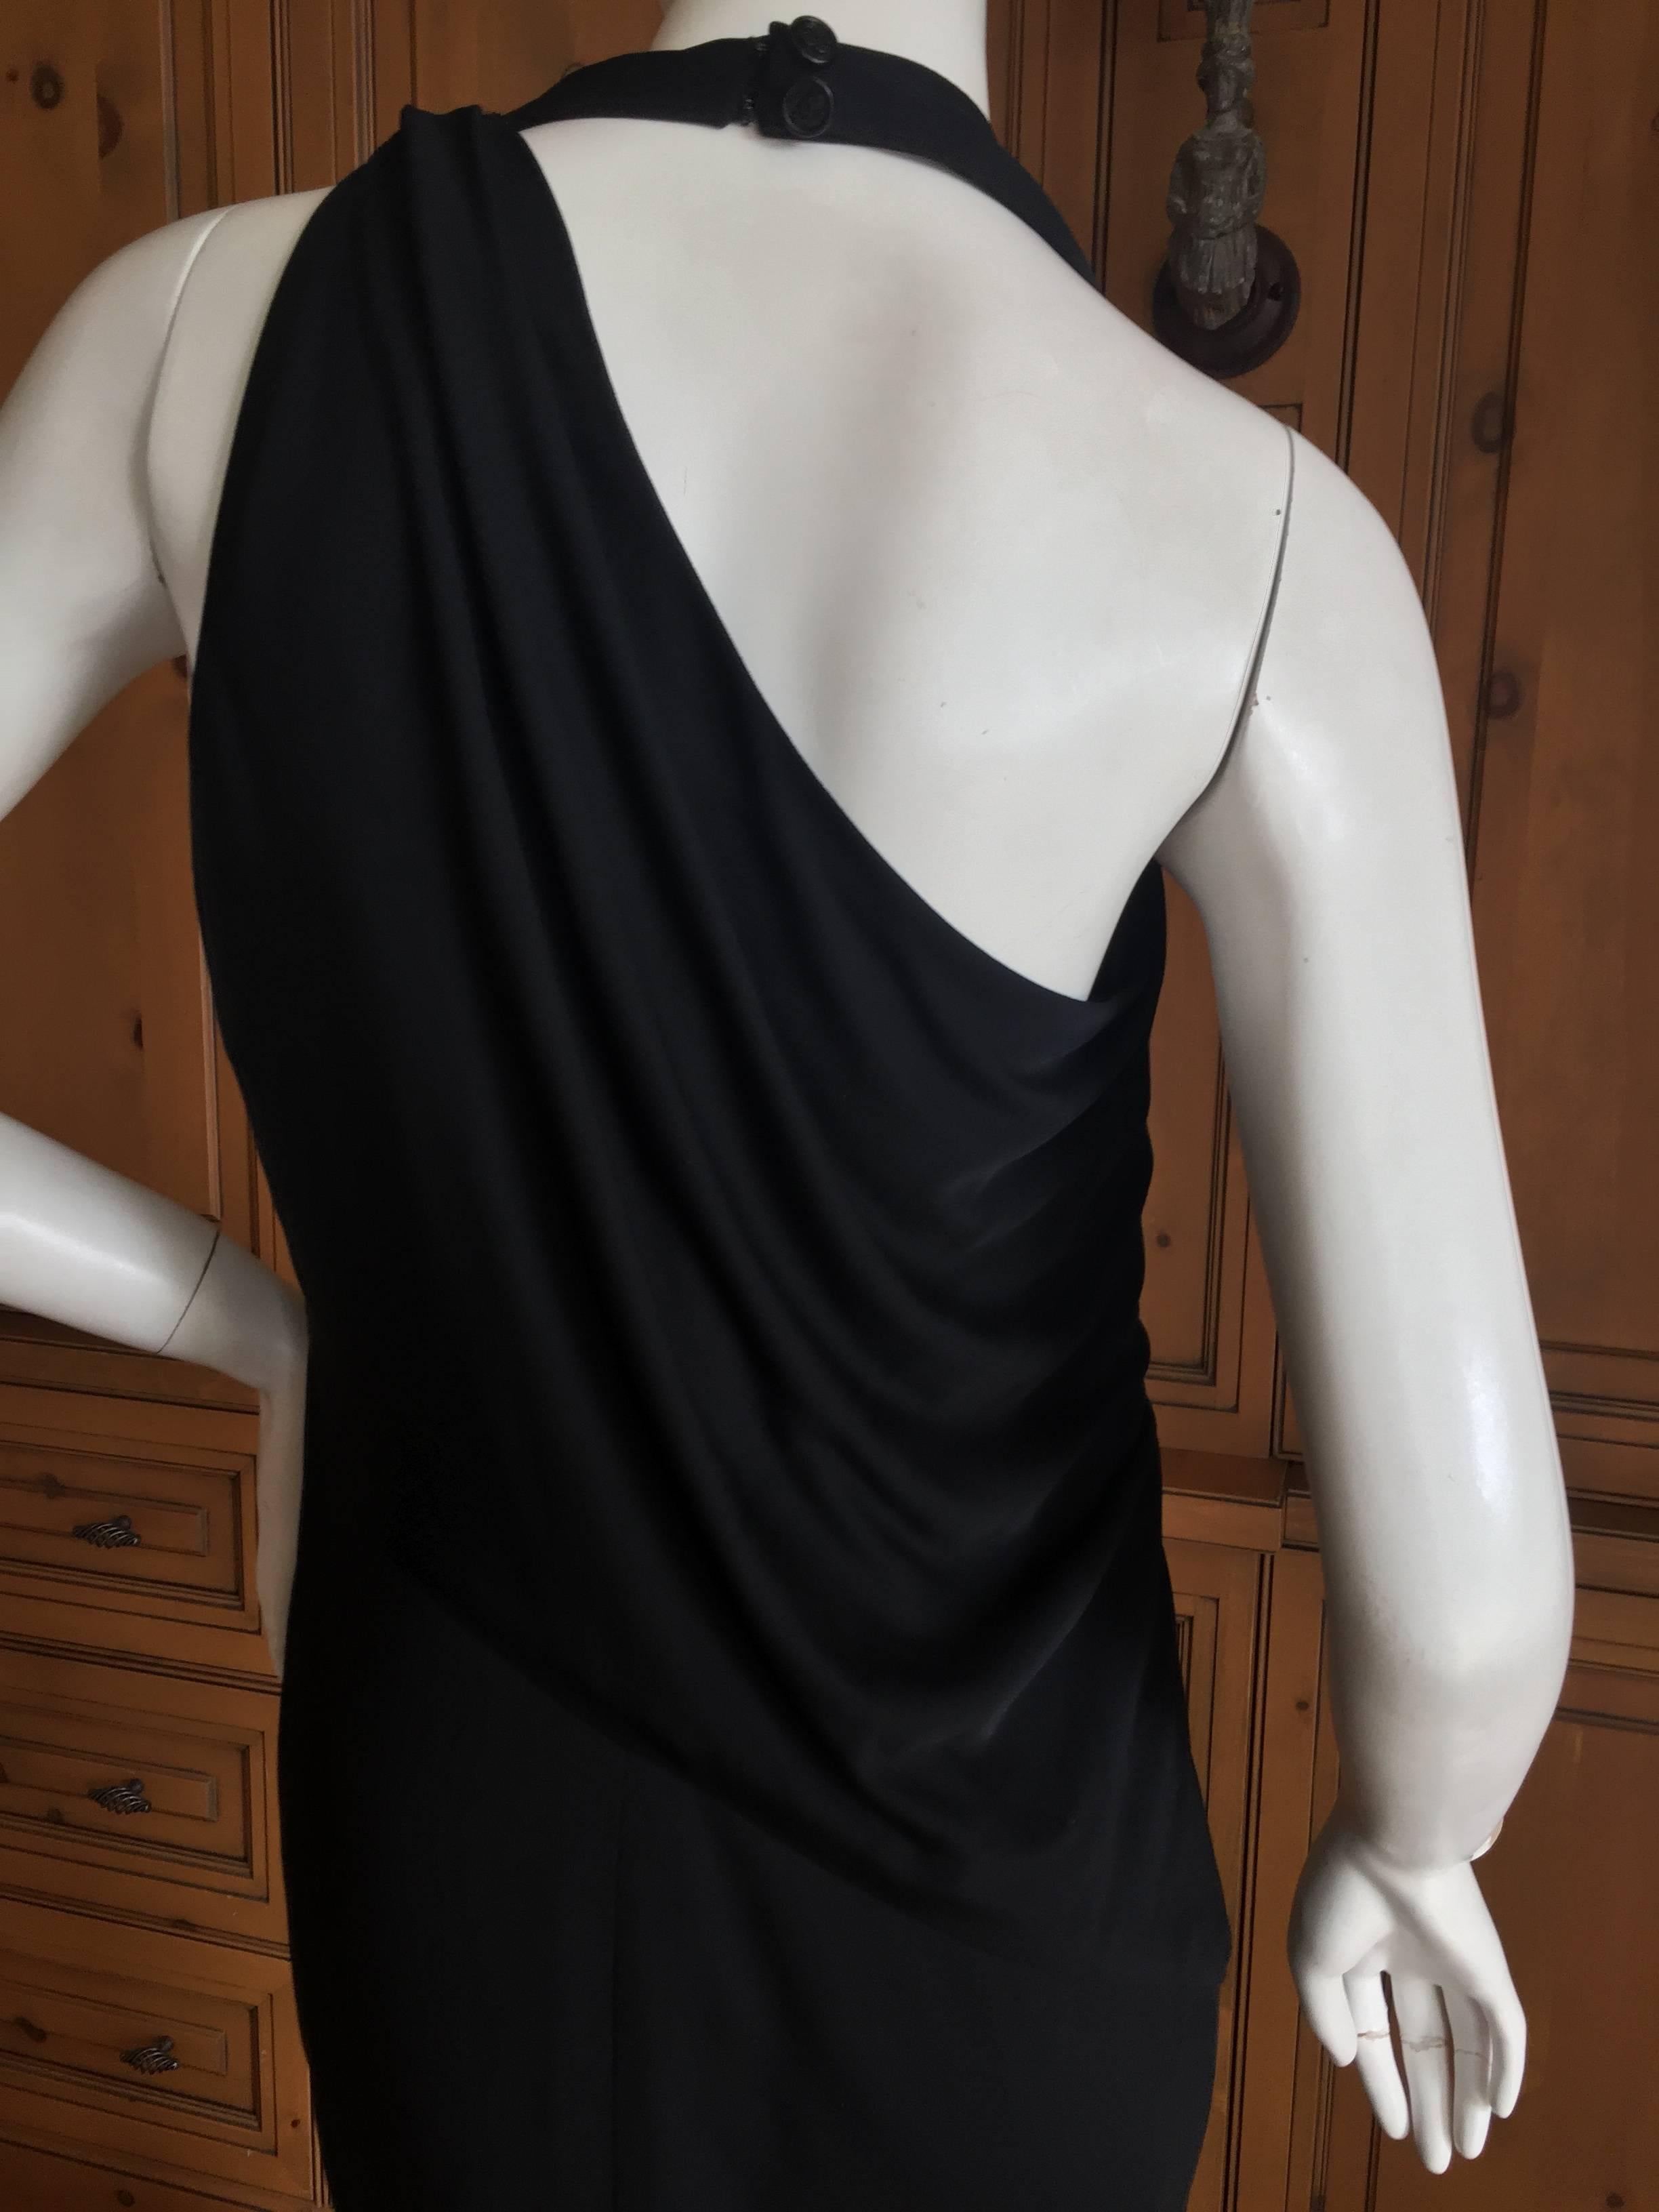 Chanel Vintage Black Evening Dress In Excellent Condition For Sale In Cloverdale, CA